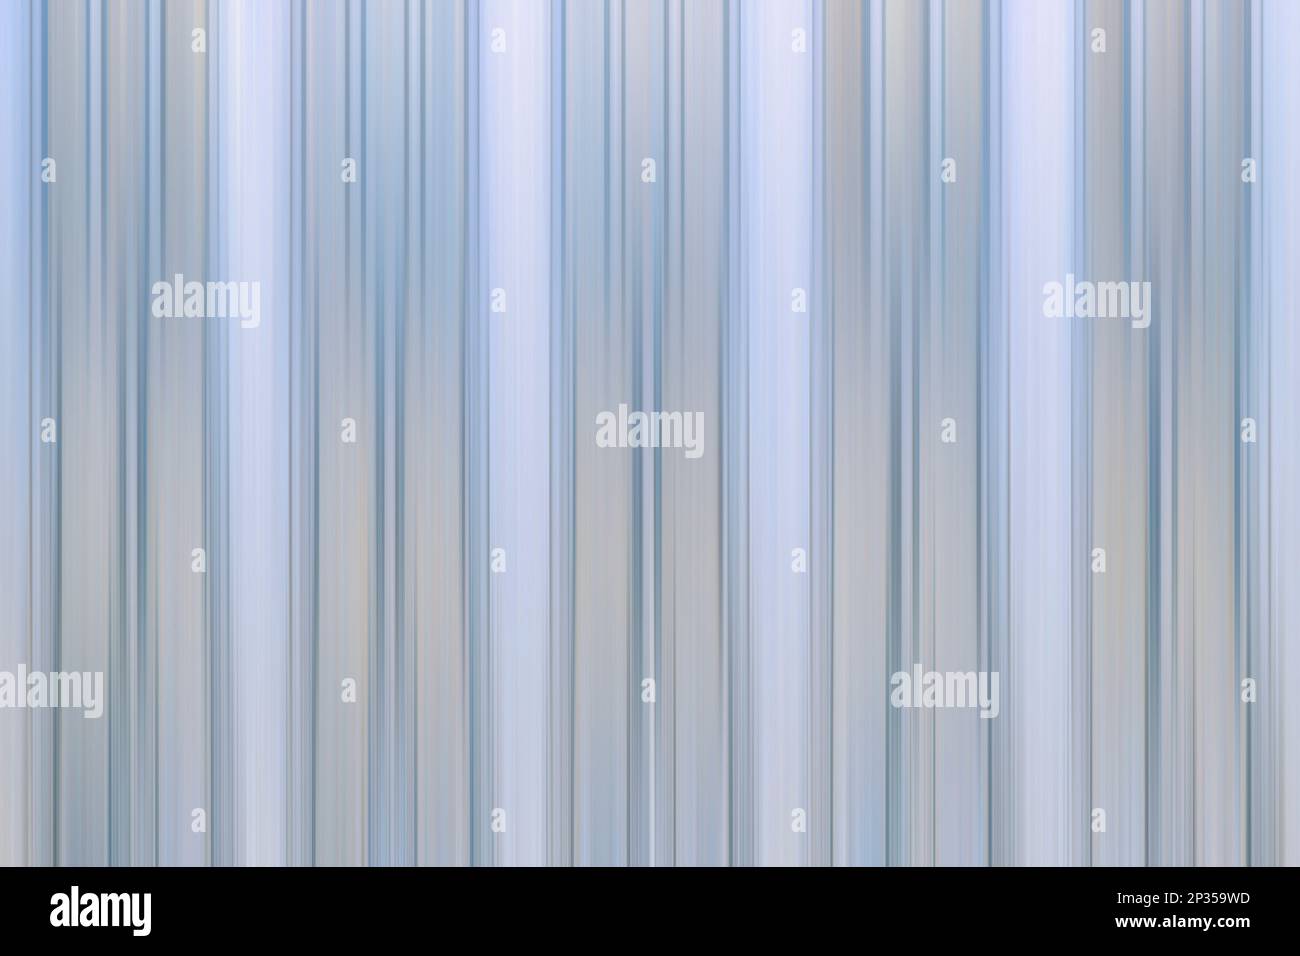 Abstract background, background made of colorful lines Stock Photo